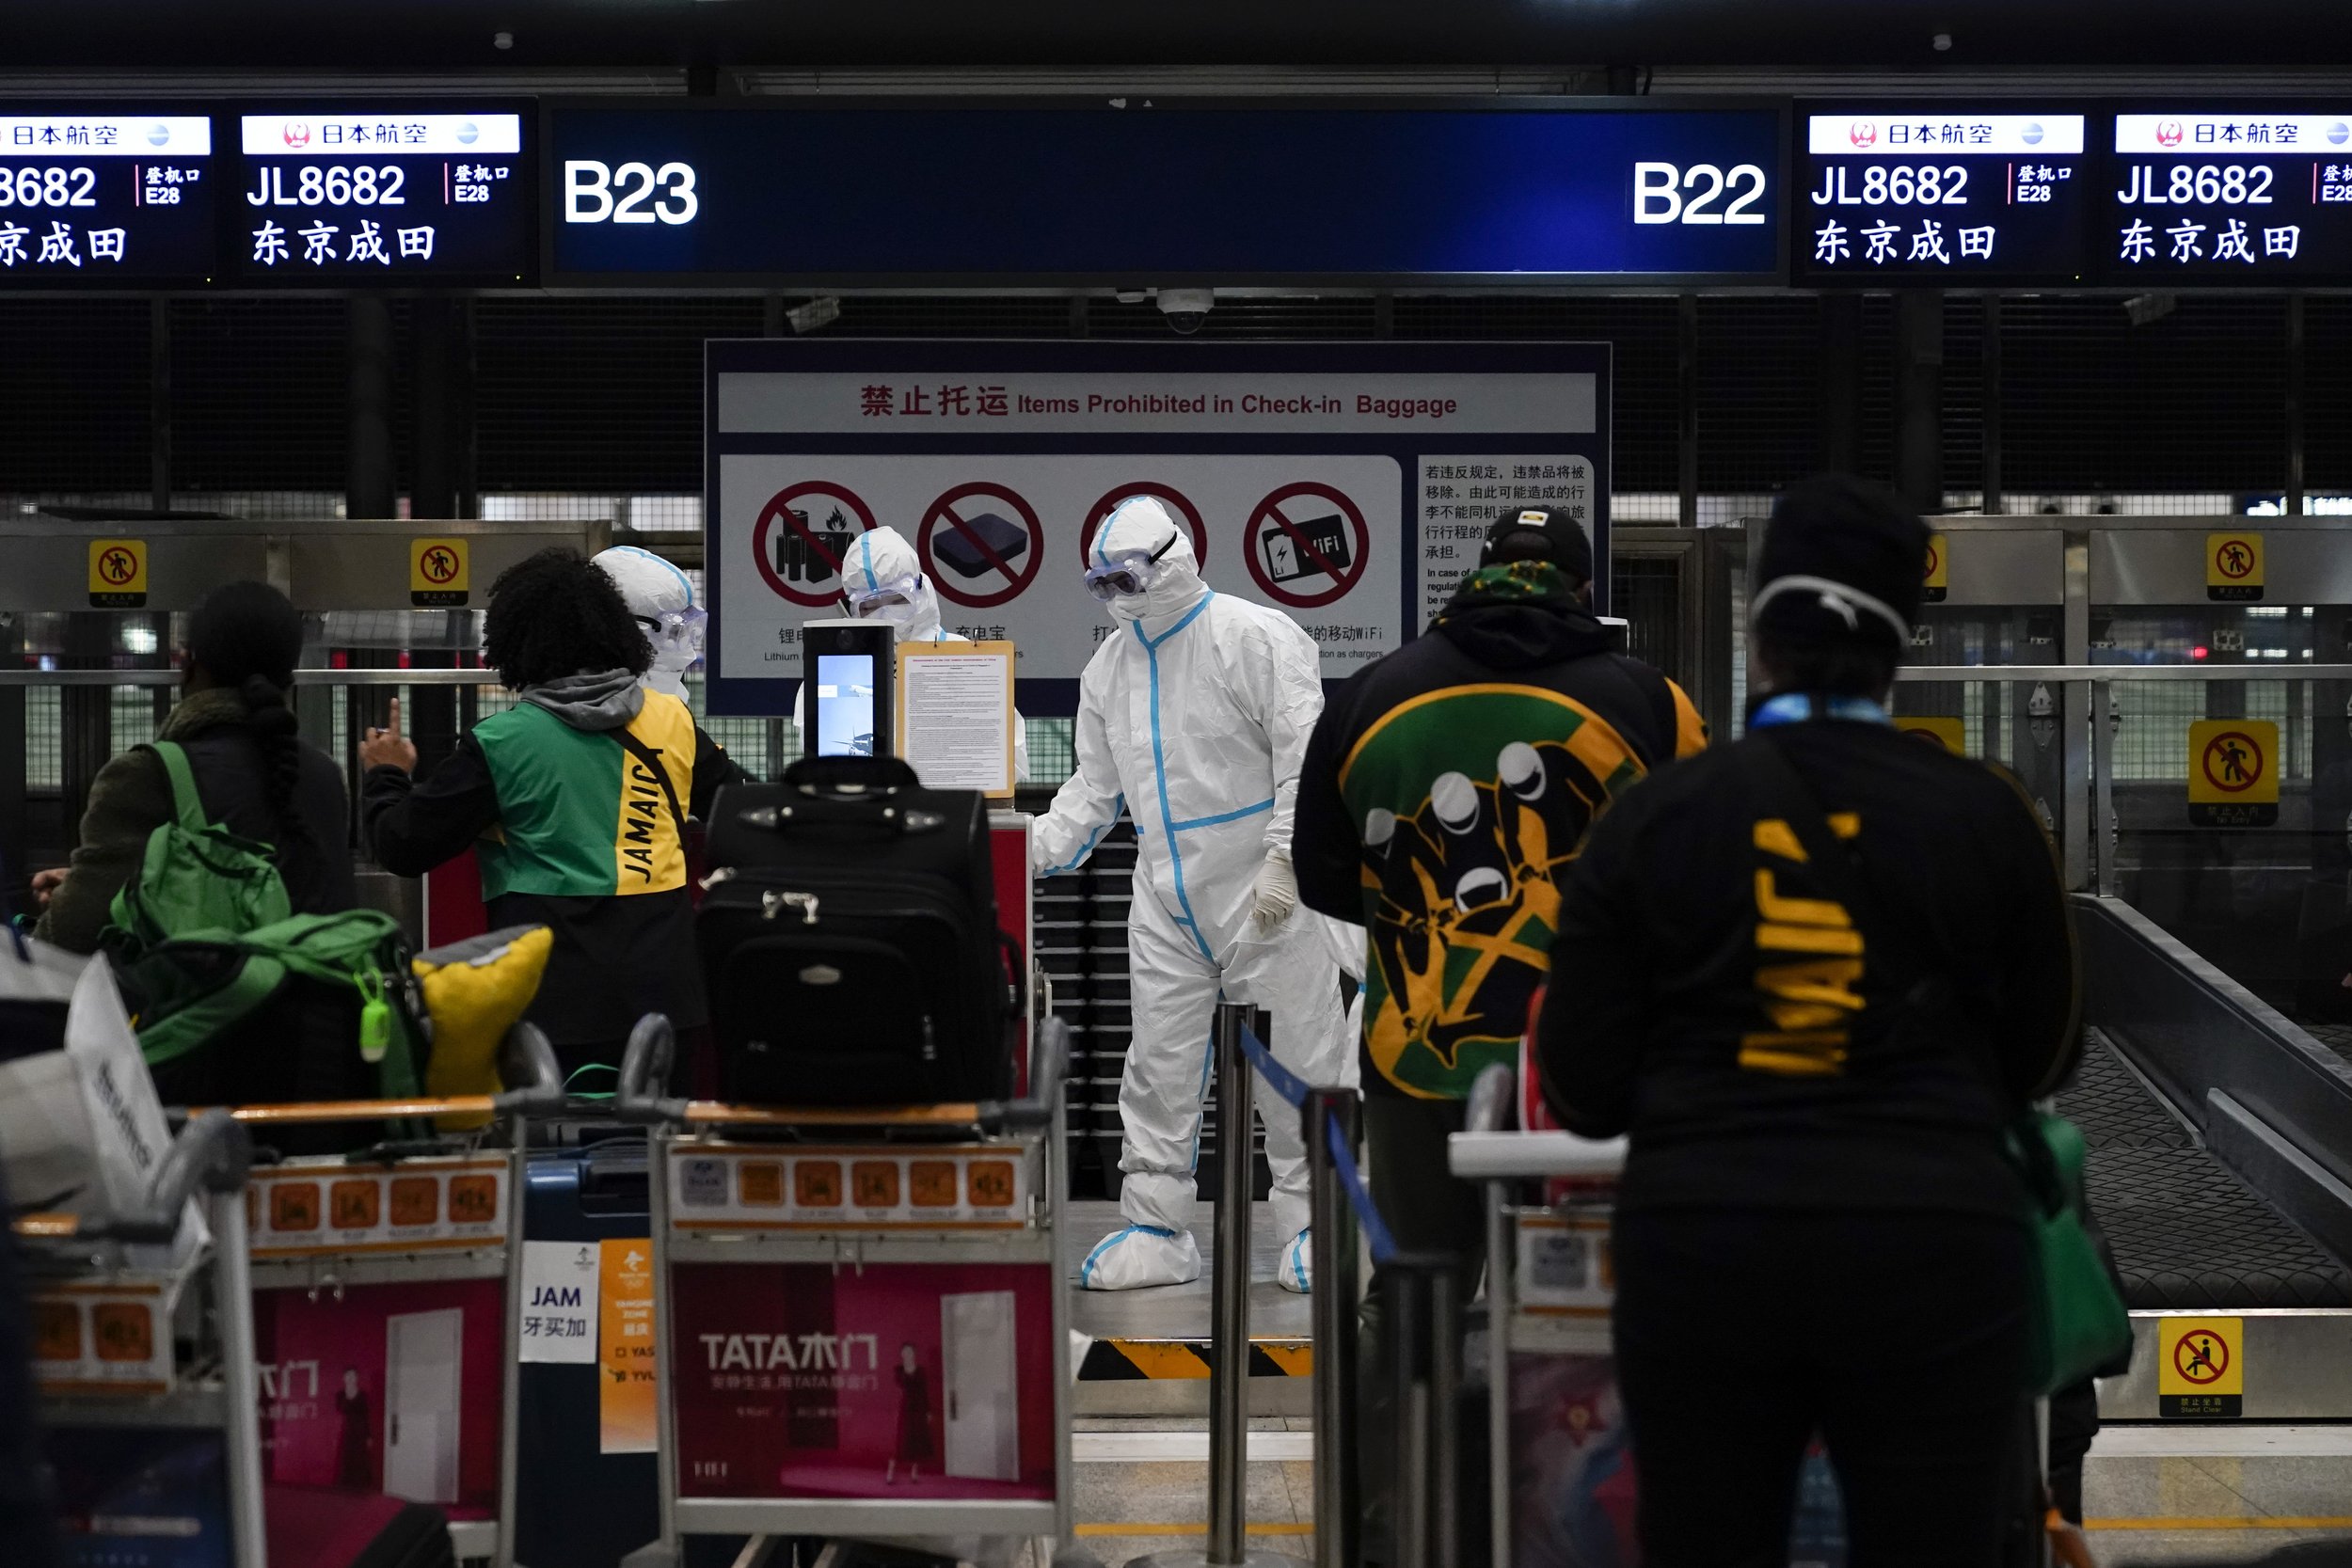  Jamaican passengers line up to check in for their flights at Beijing Capital International Airport after the conclusion of the 2022 Winter Olympics, Sunday, Feb. 20, 2022, in Beijing. (AP Photo/Ashley Landis) 